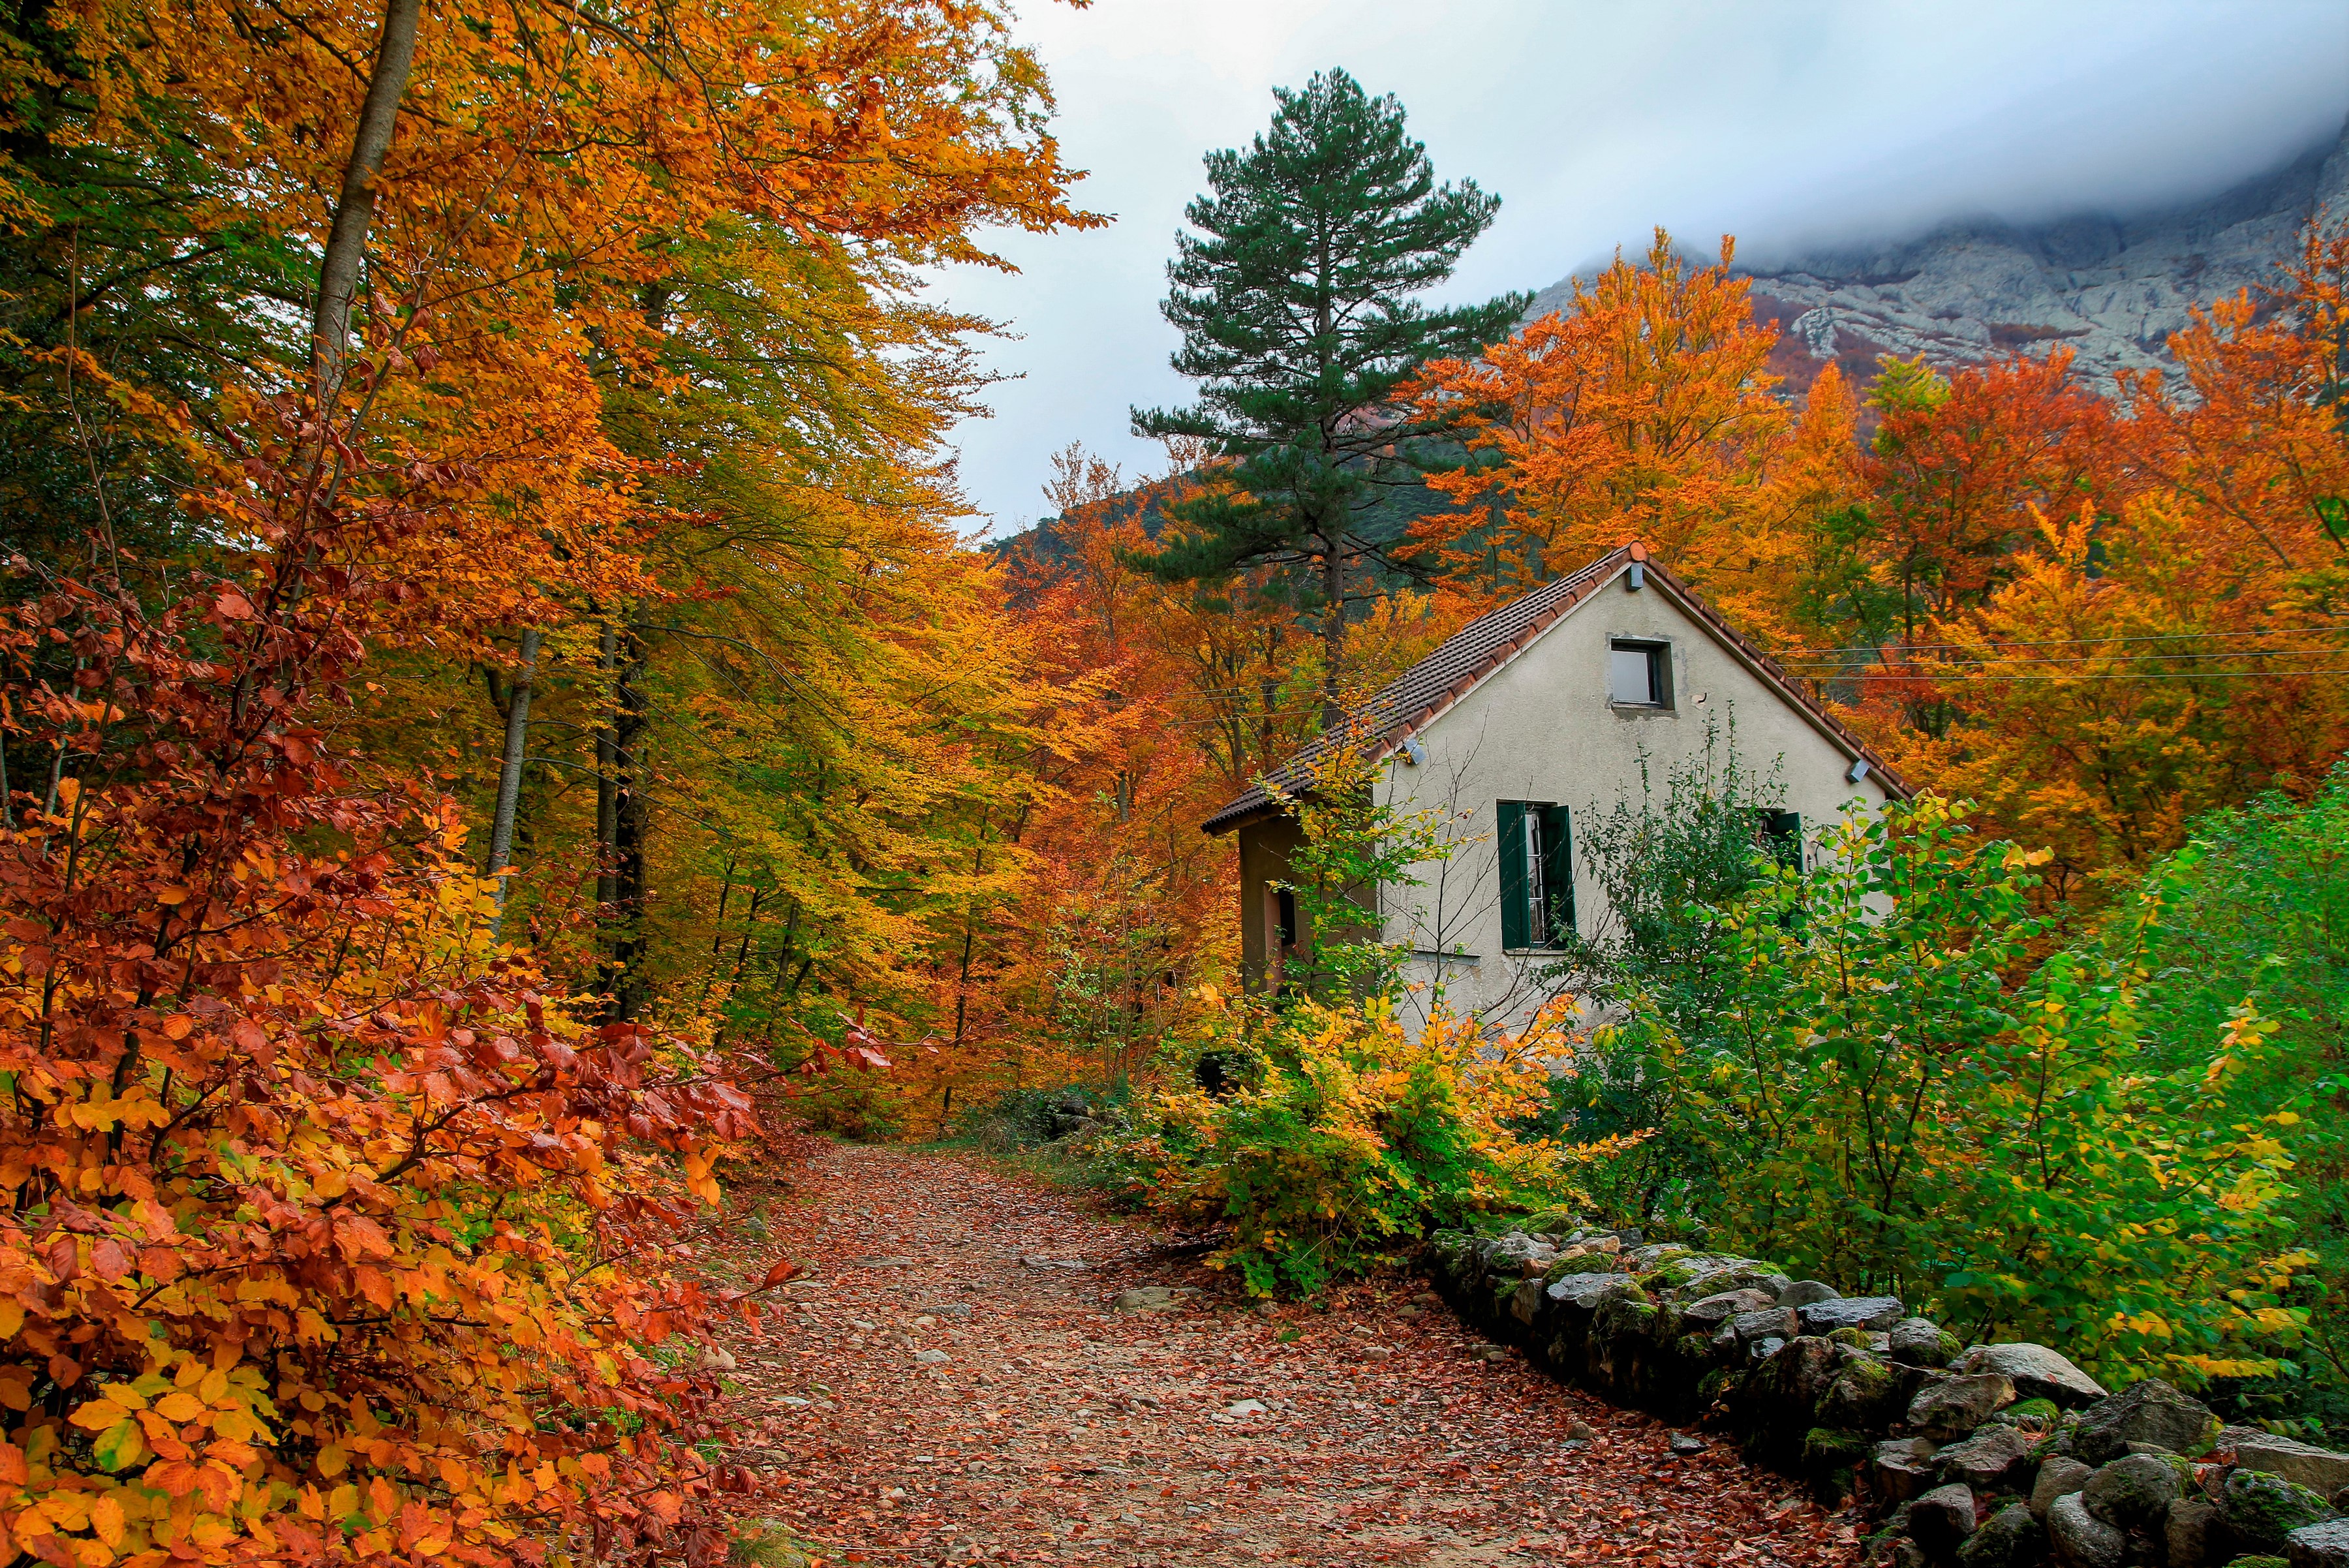 man made, path, colorful, fall, house, shed, tree